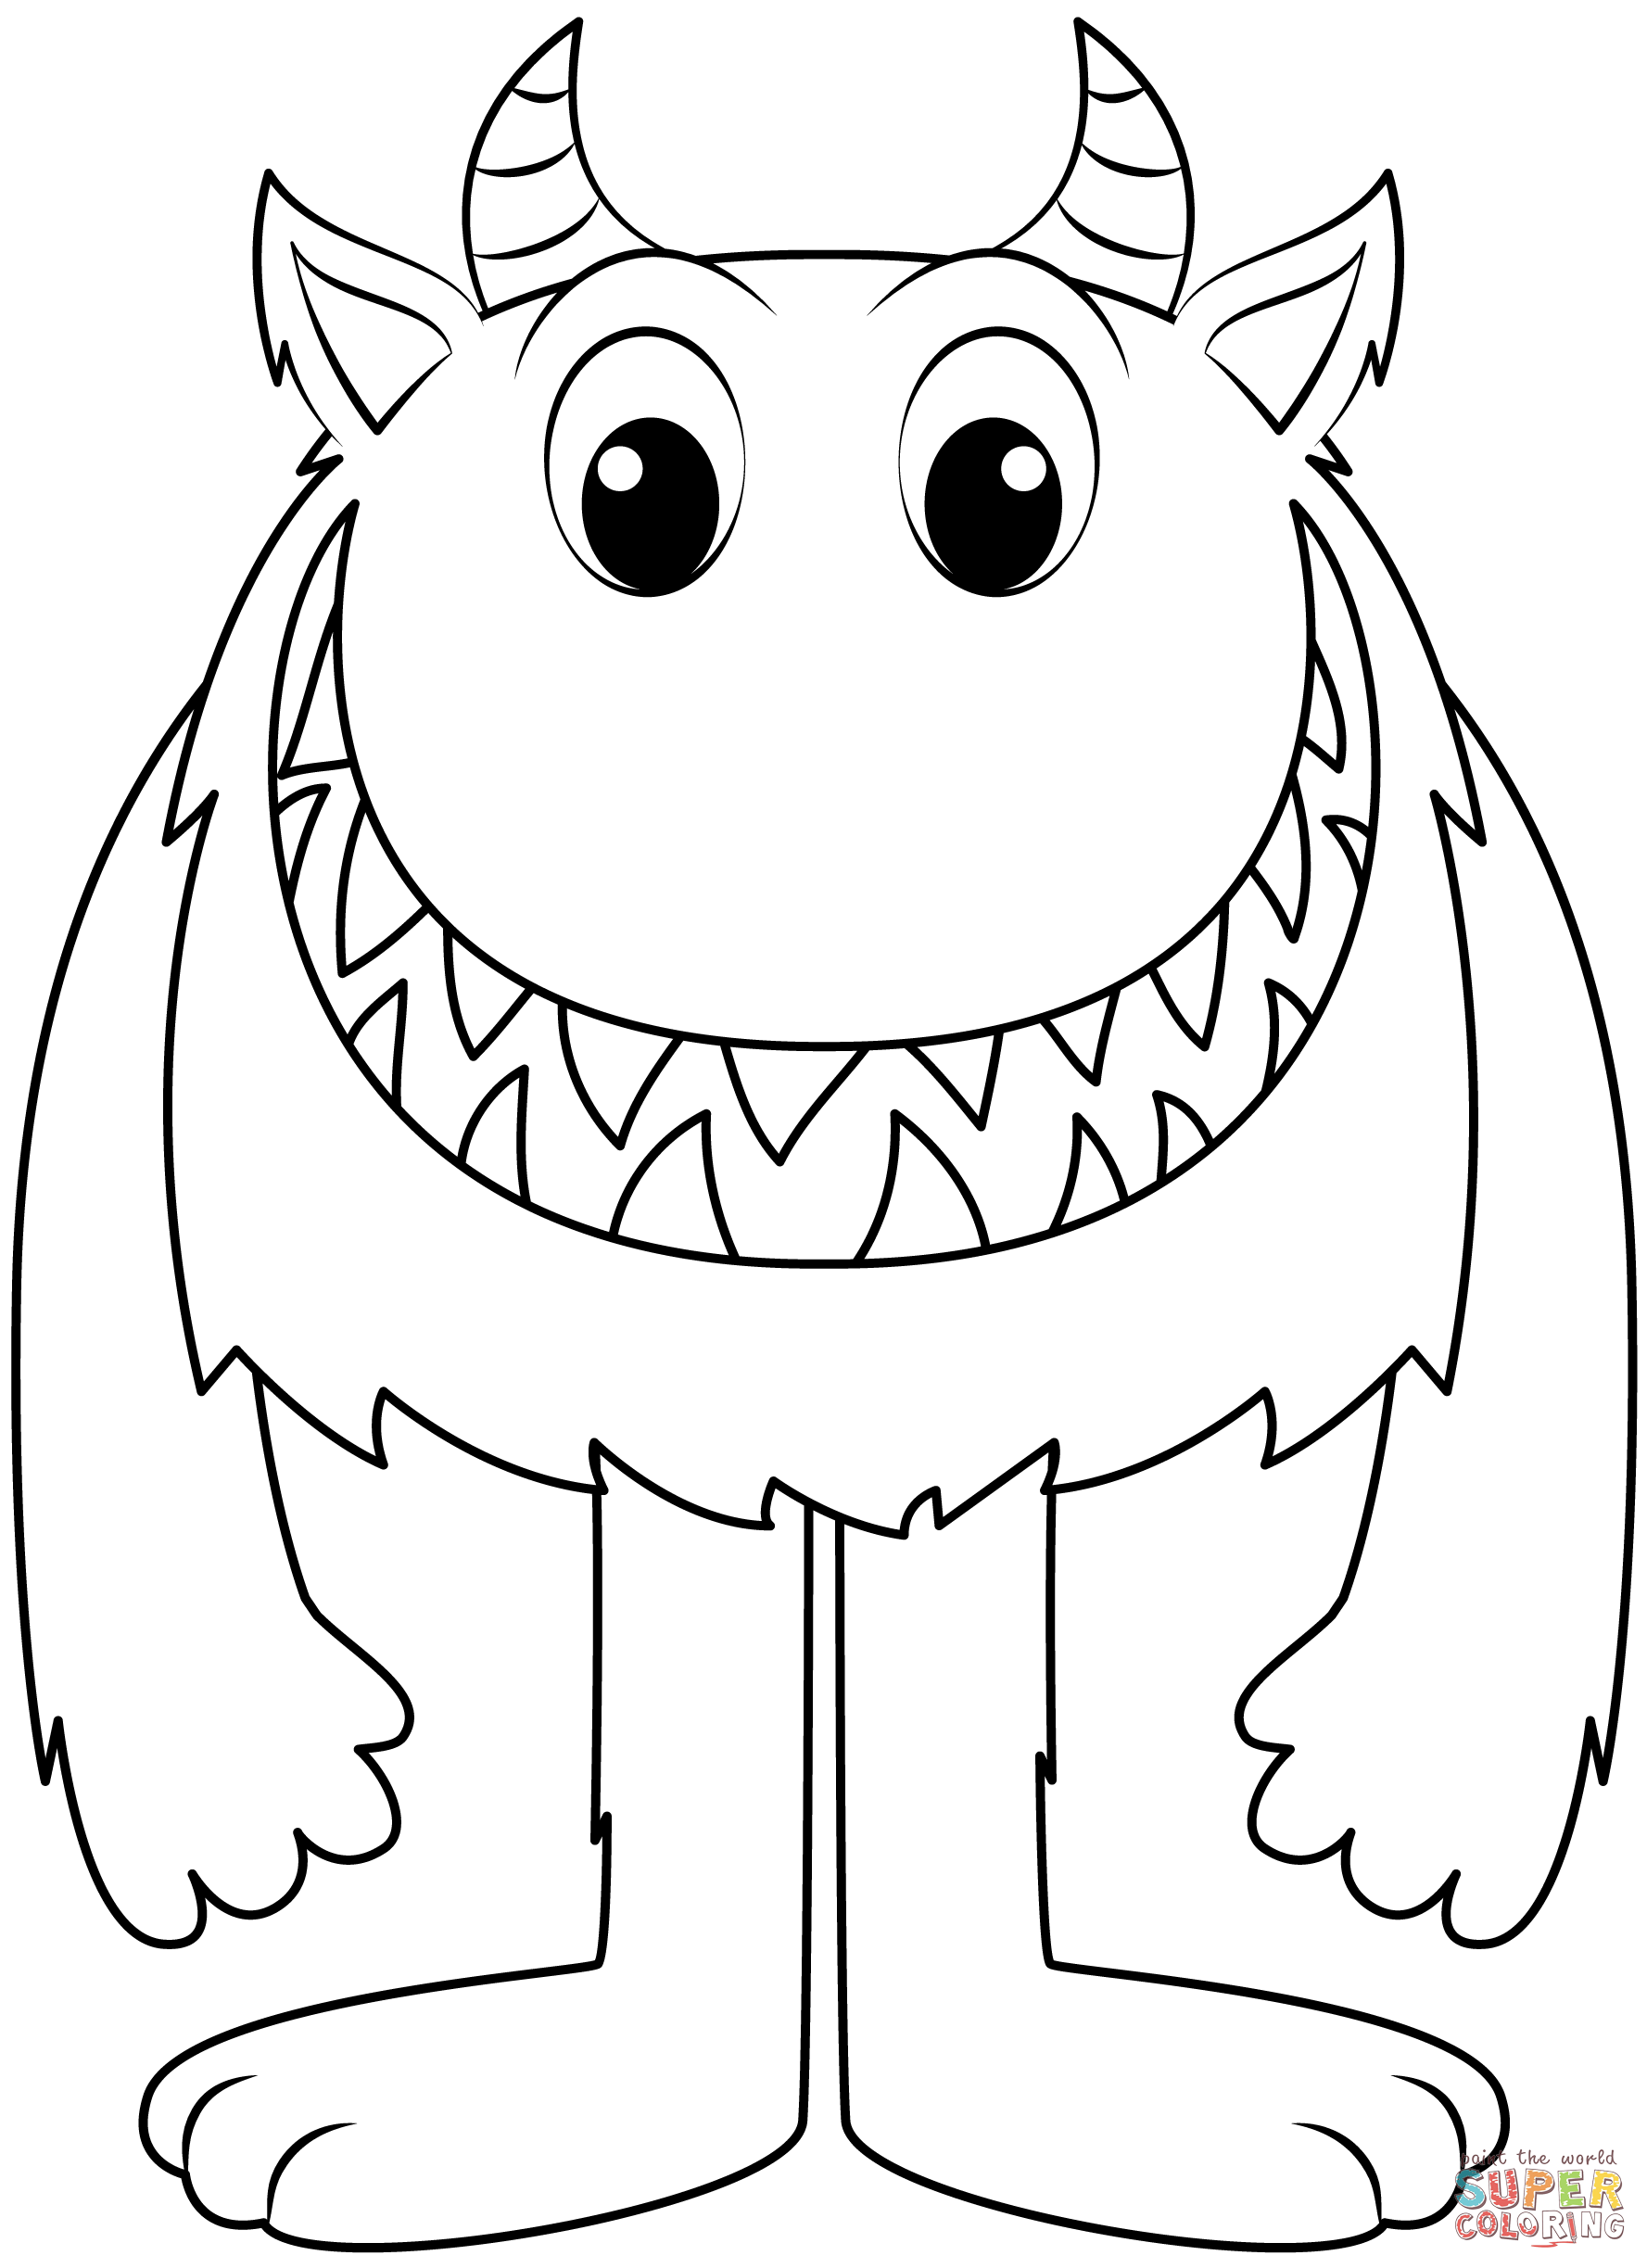 Monster coloring page | Free Printable Coloring Pages